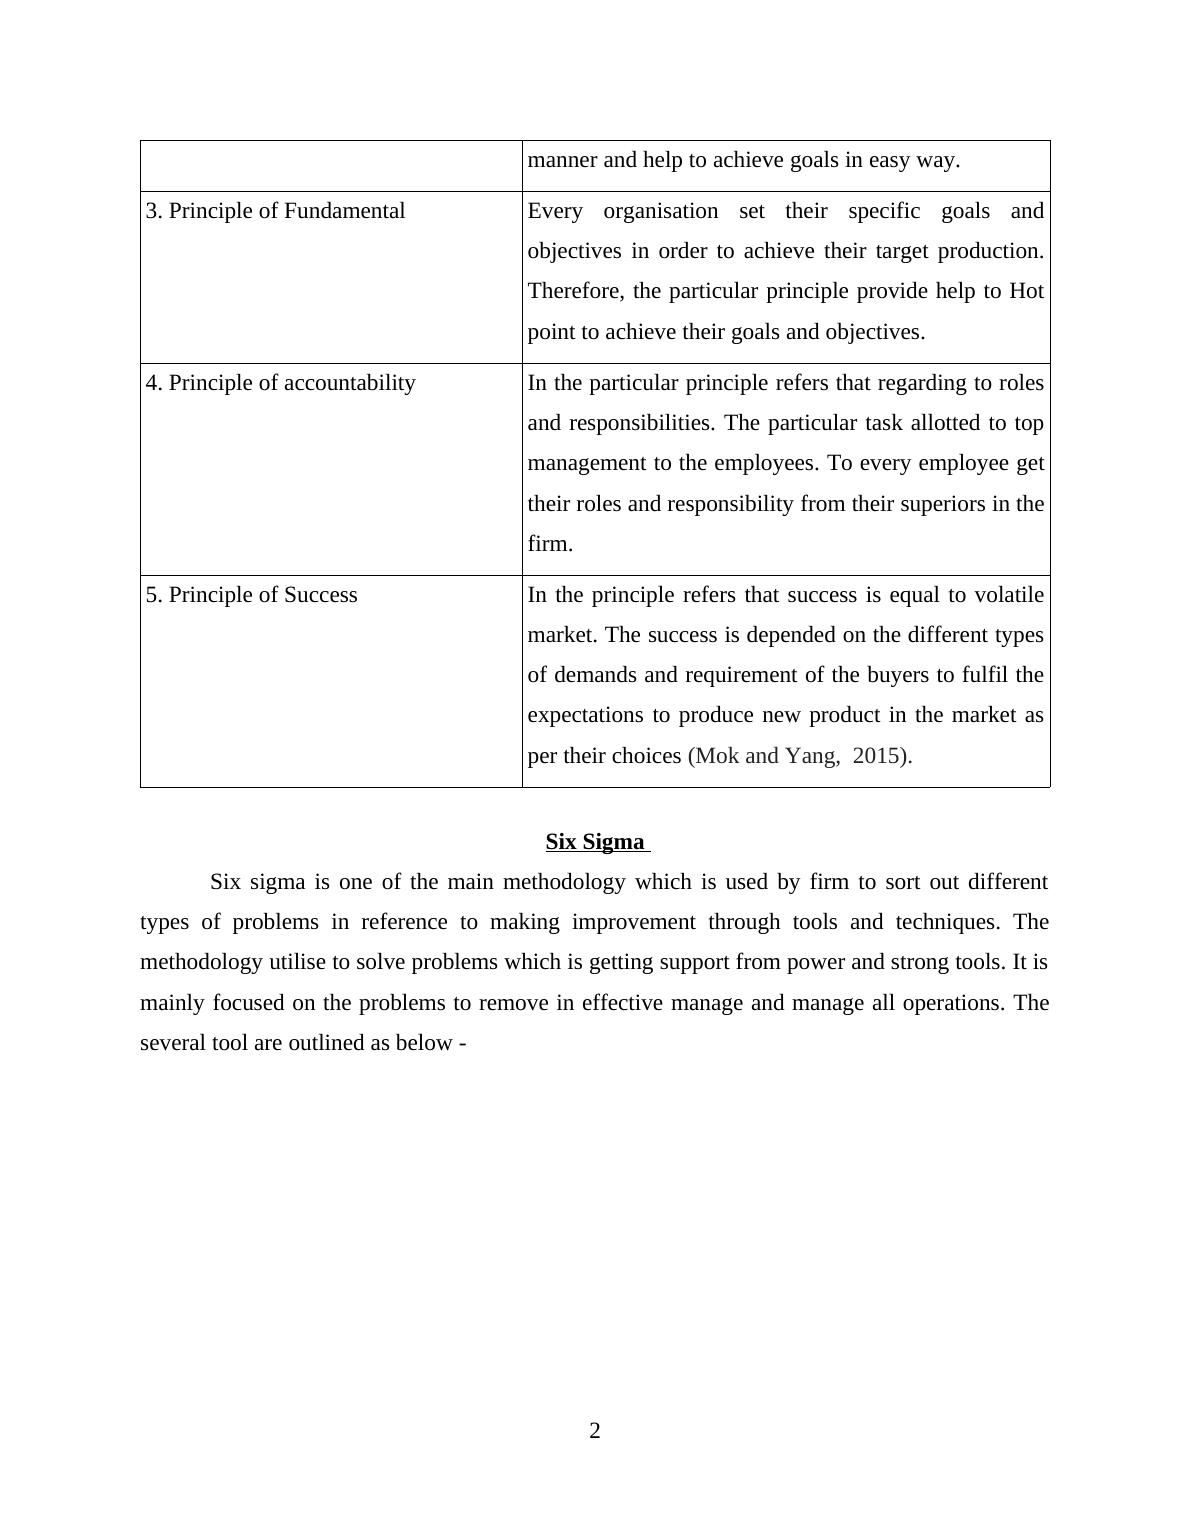 Operations & Project Management Assignment - organisation Hot point_4